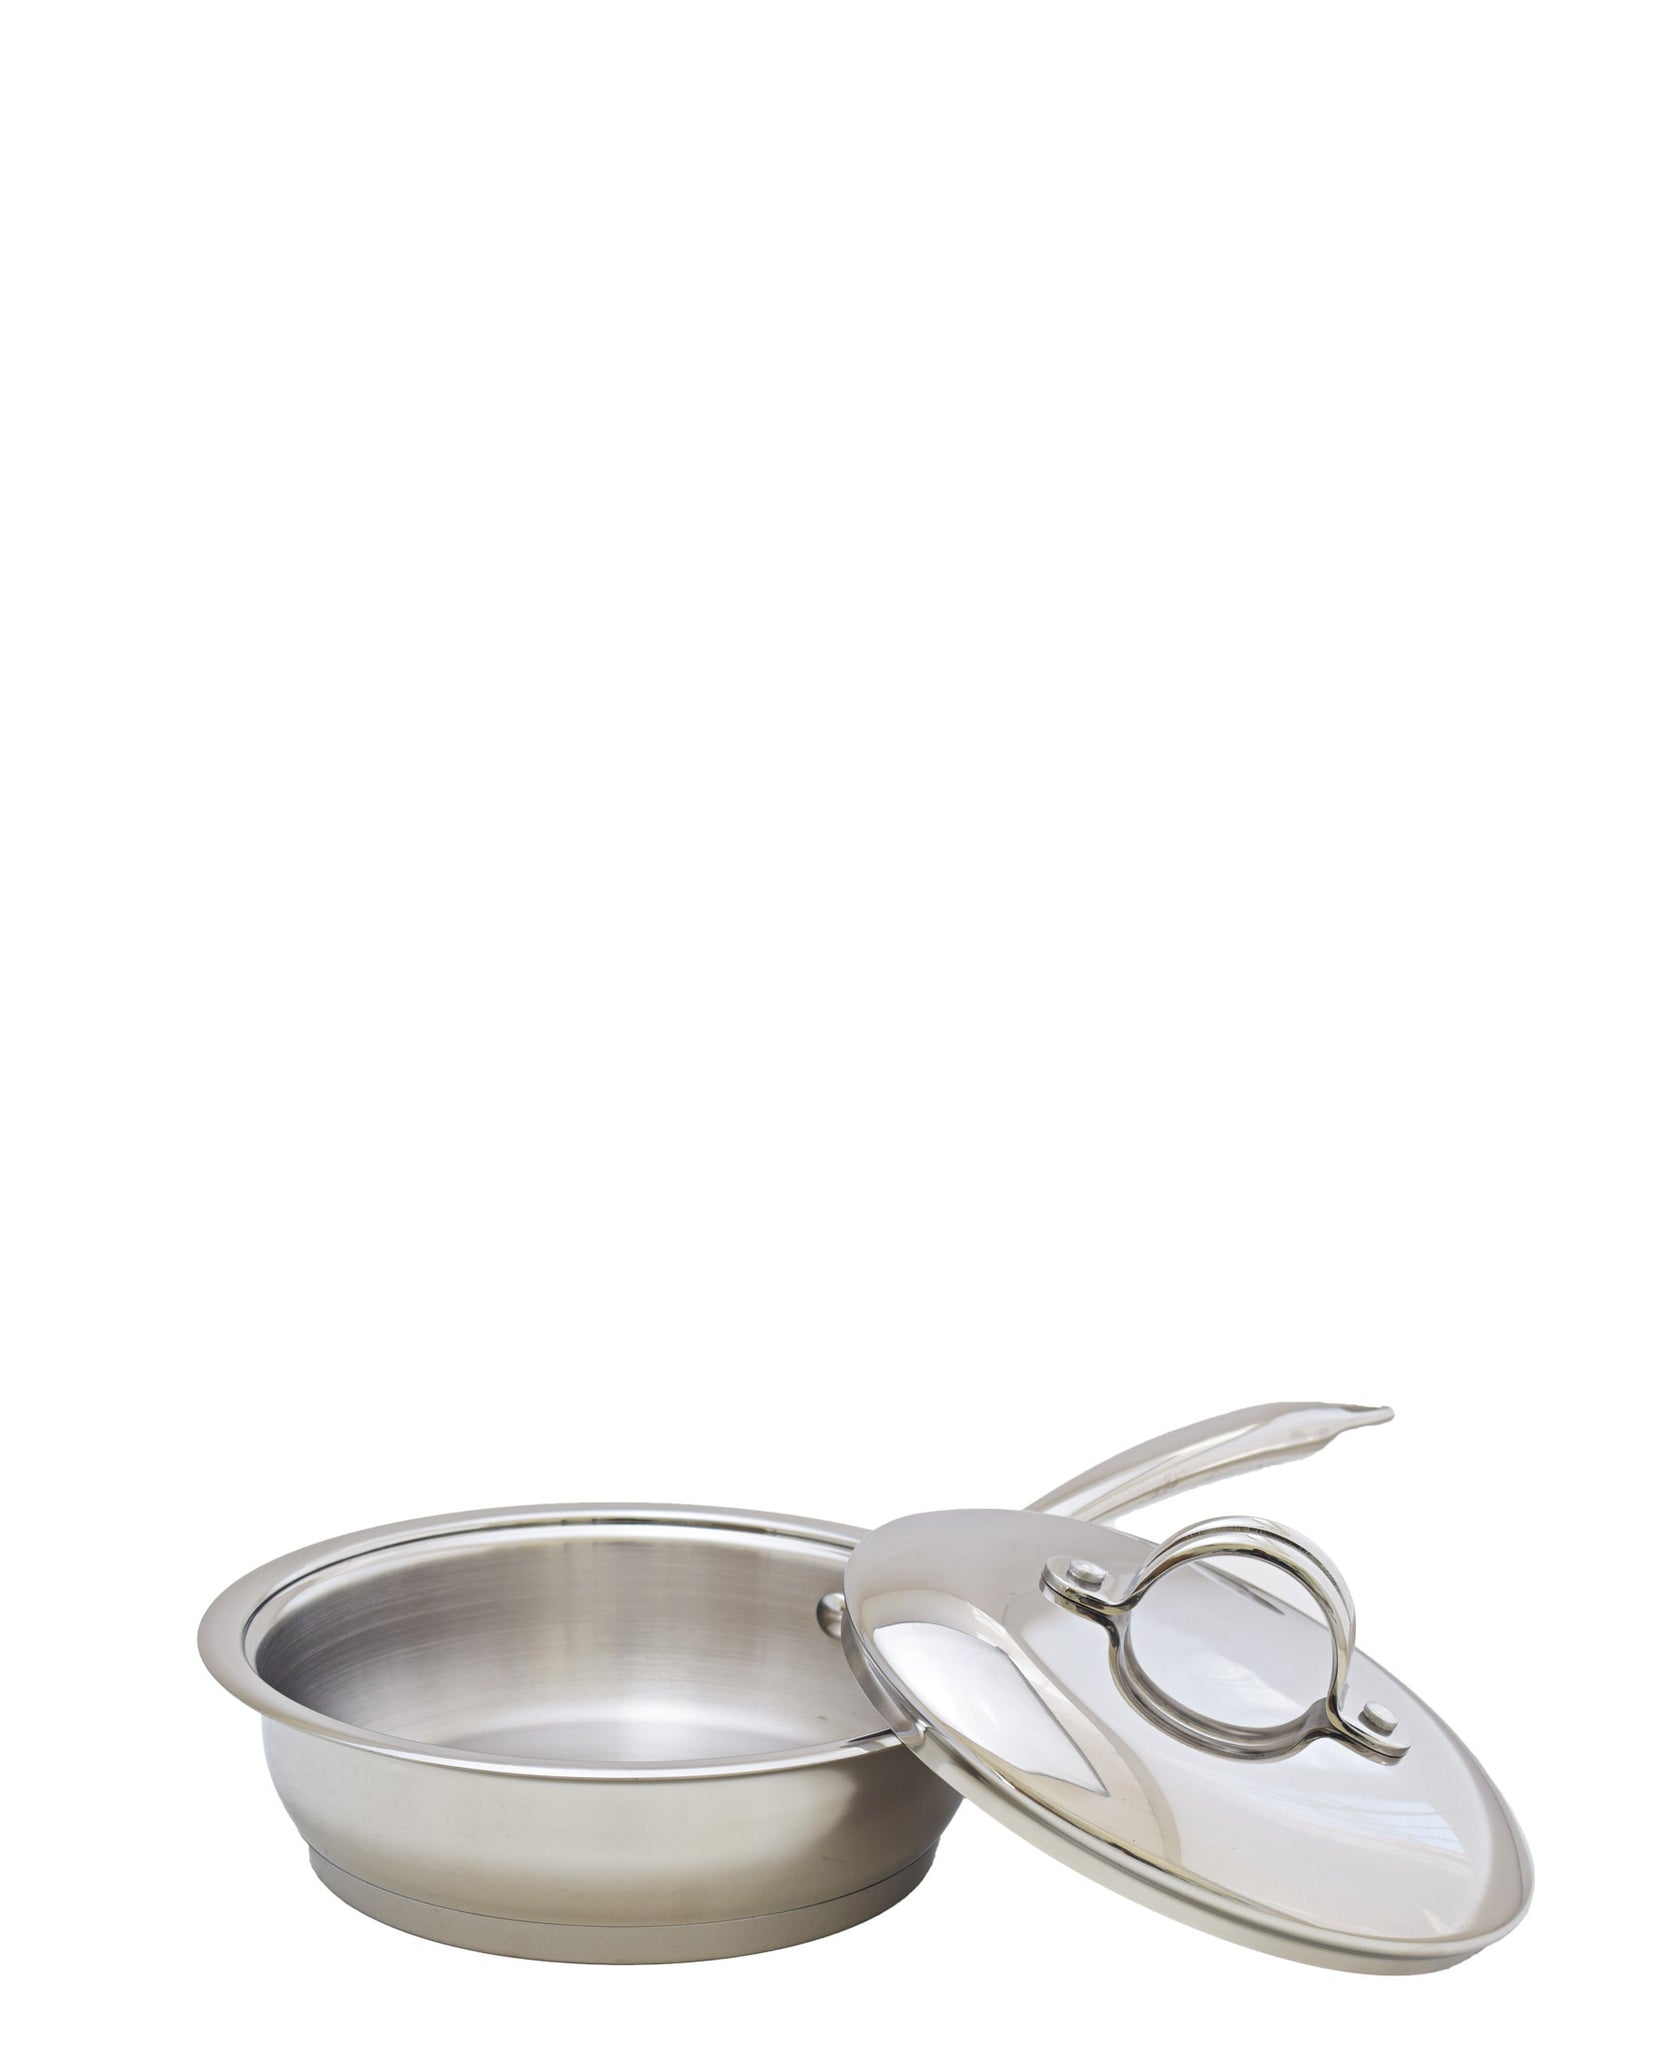 Tez 20cm Fry Pan With Lid - Silver